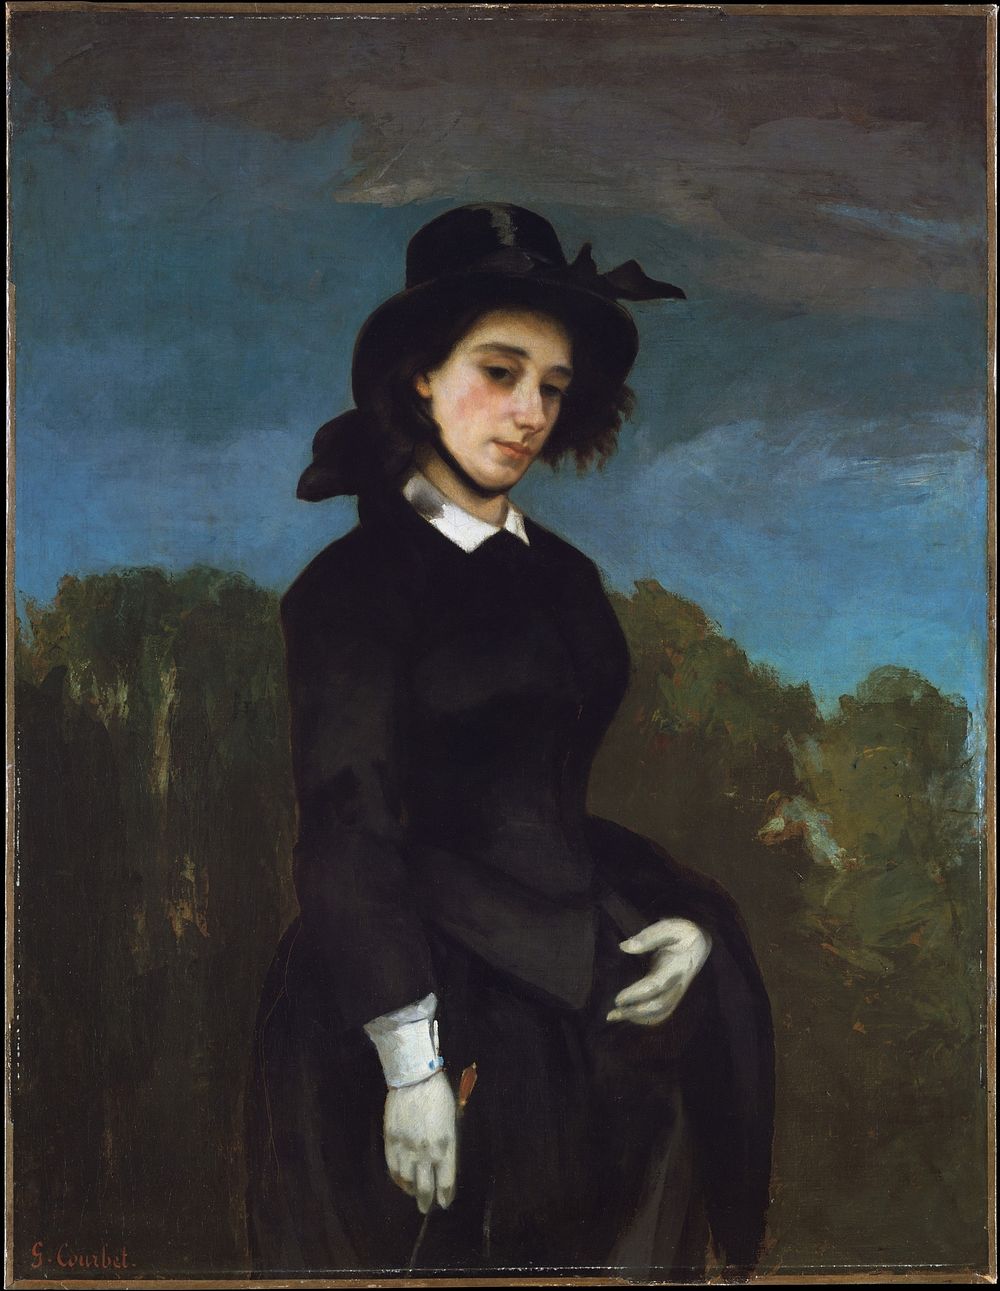 Woman in a Riding Habit (L'Amazone) by Gustave Courbet